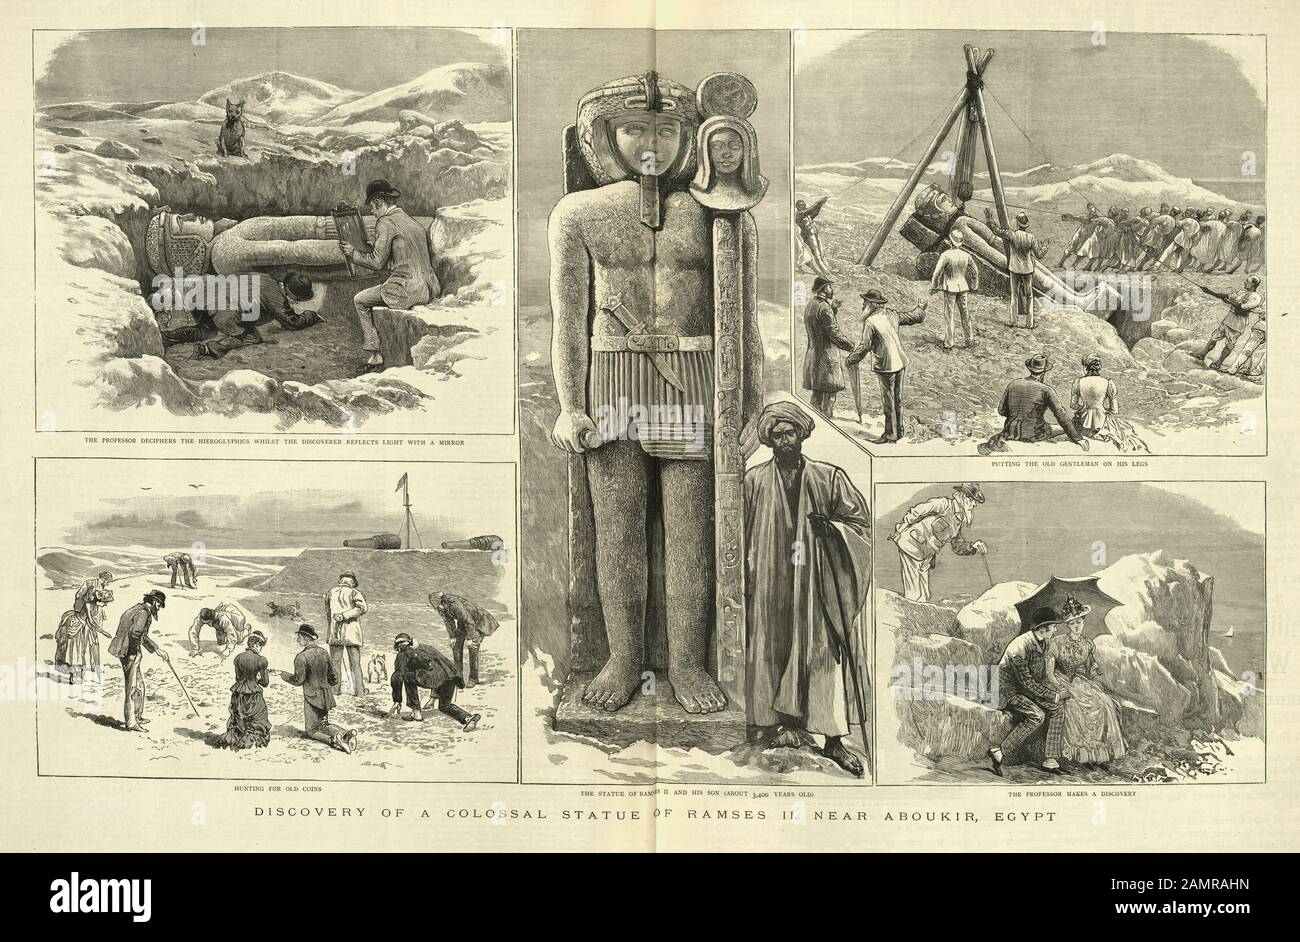 Discovery of a colossal statue of Ramses II near Aboukir, Egypt, 19th Century Stock Photo